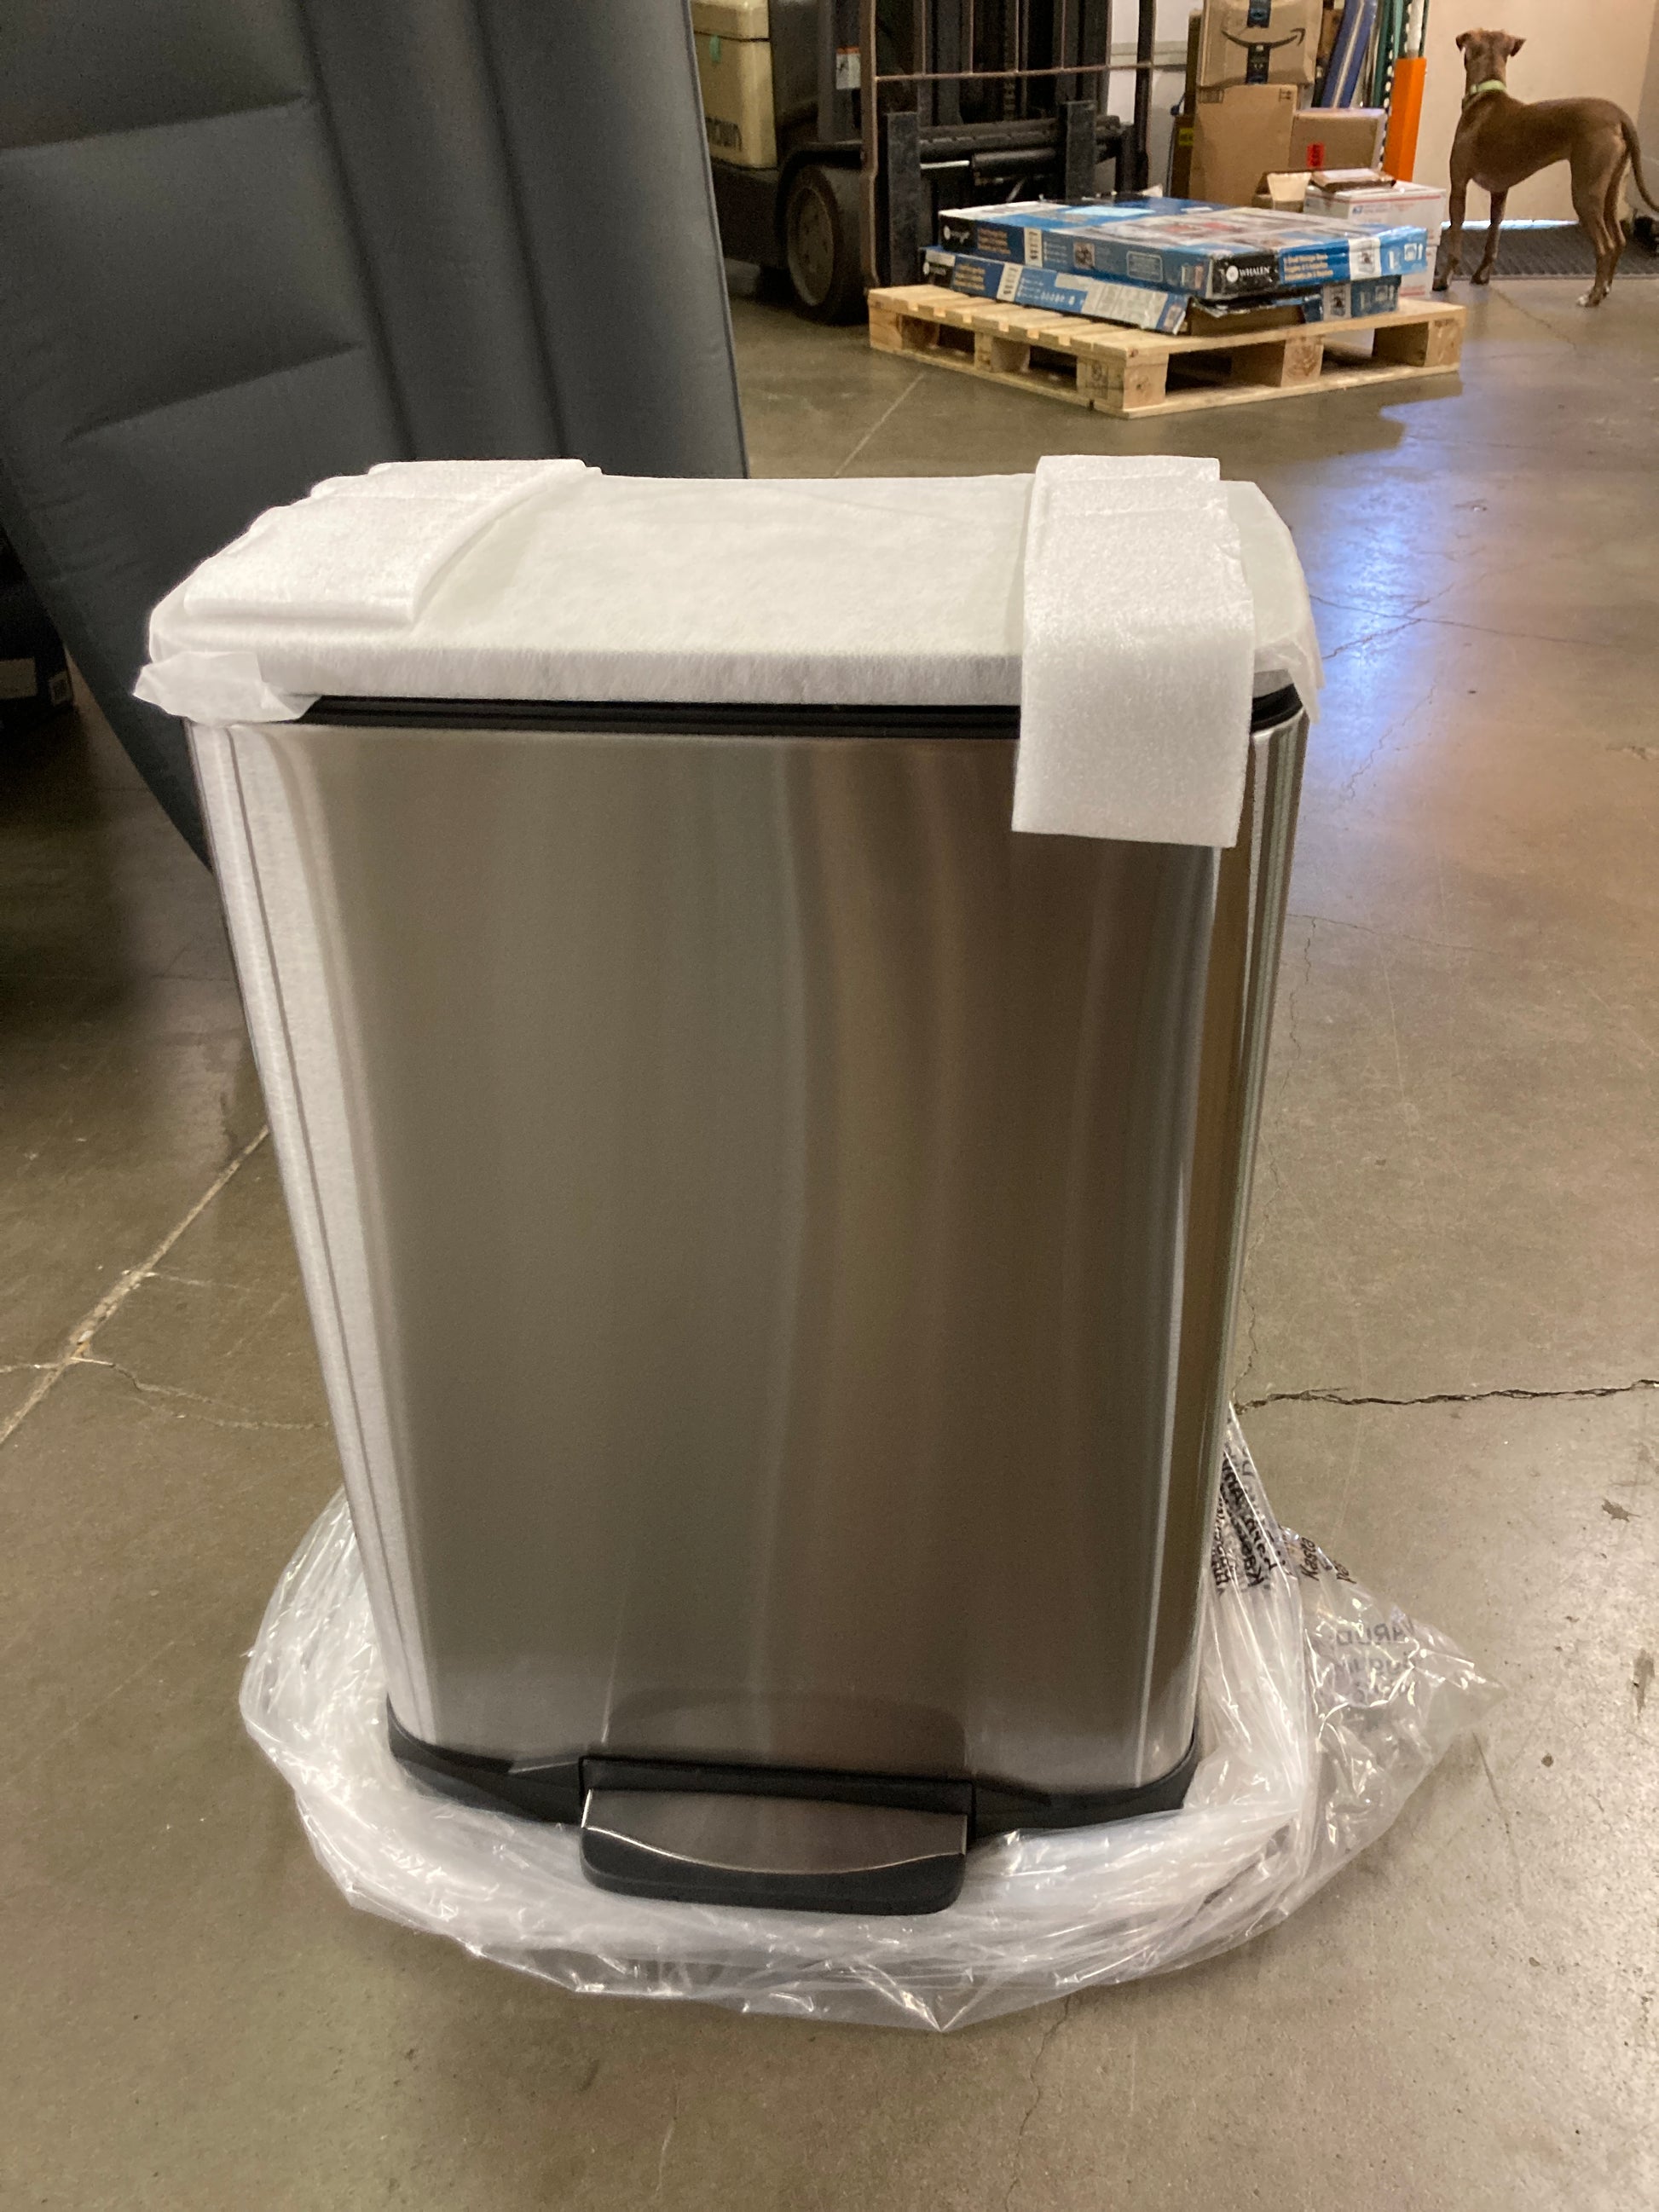 Costco - Neocube 50 Liter Dual Compartment 28 Liter and 18 Liter Stainless Steel Recycle and Trash Bin - Retail $99 Default Title